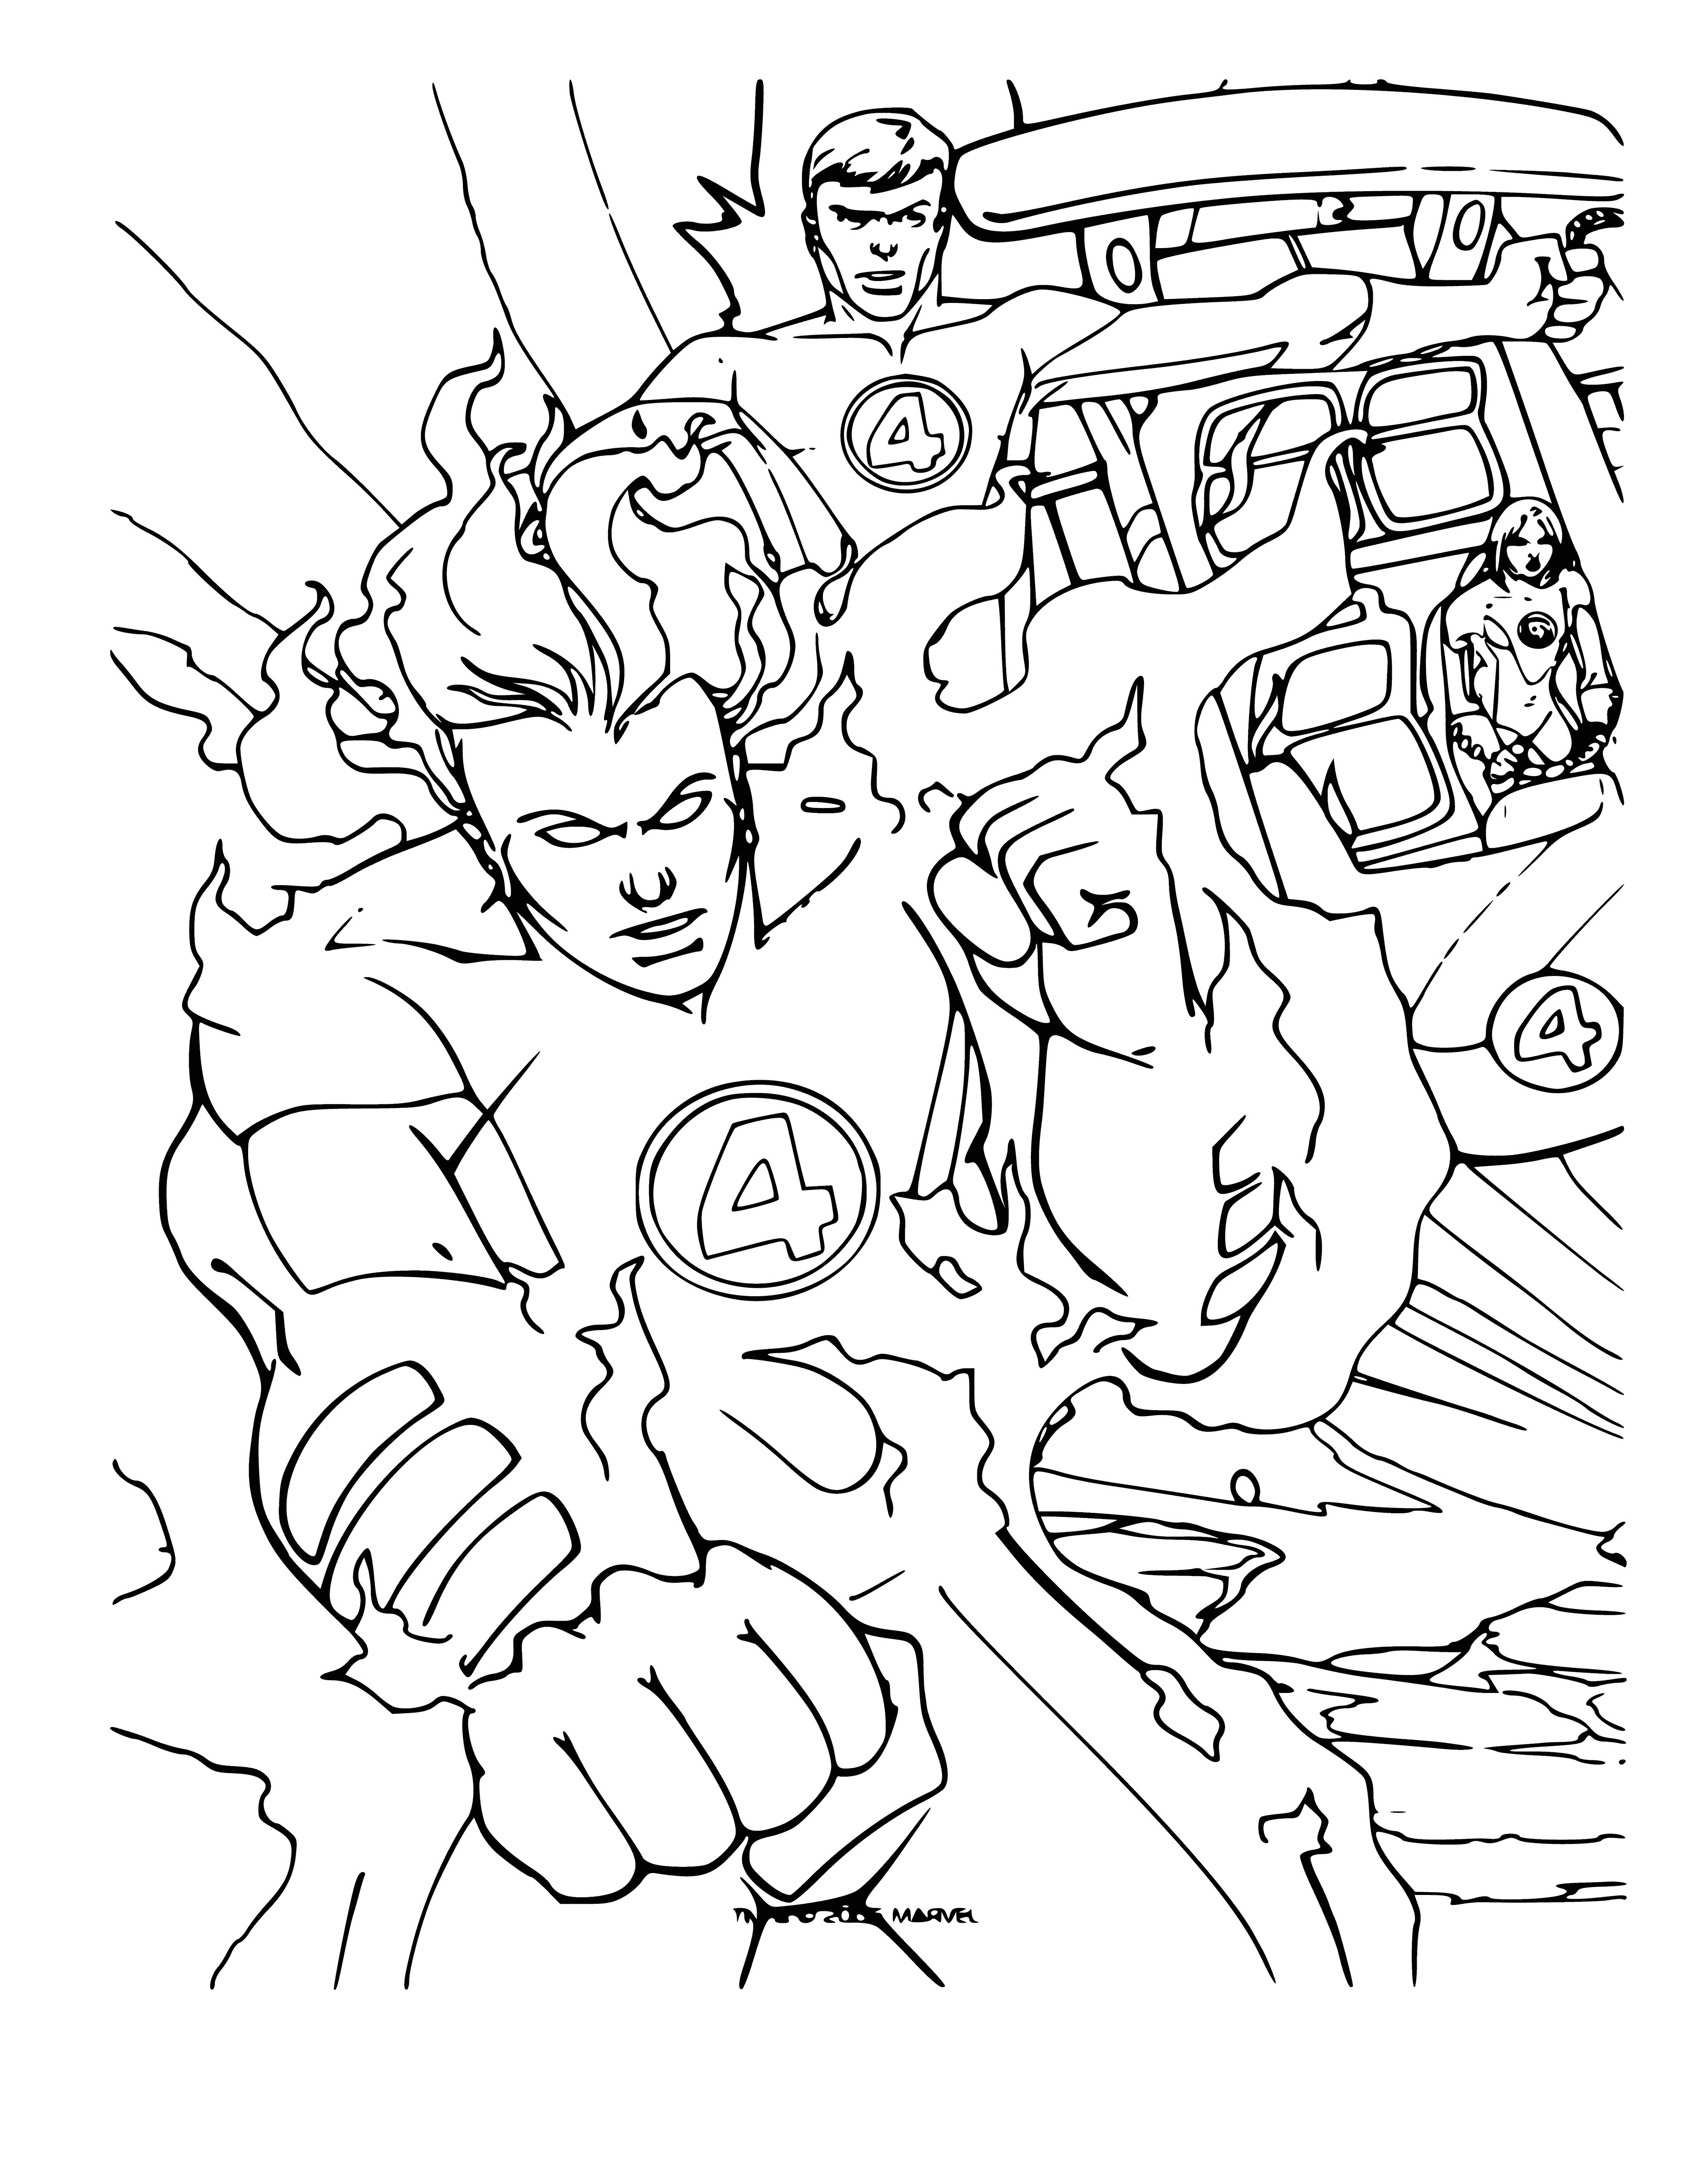 coloring page: Four powerful people with flaming hair, clothes and swords join forces to control fire. Serious expressions!